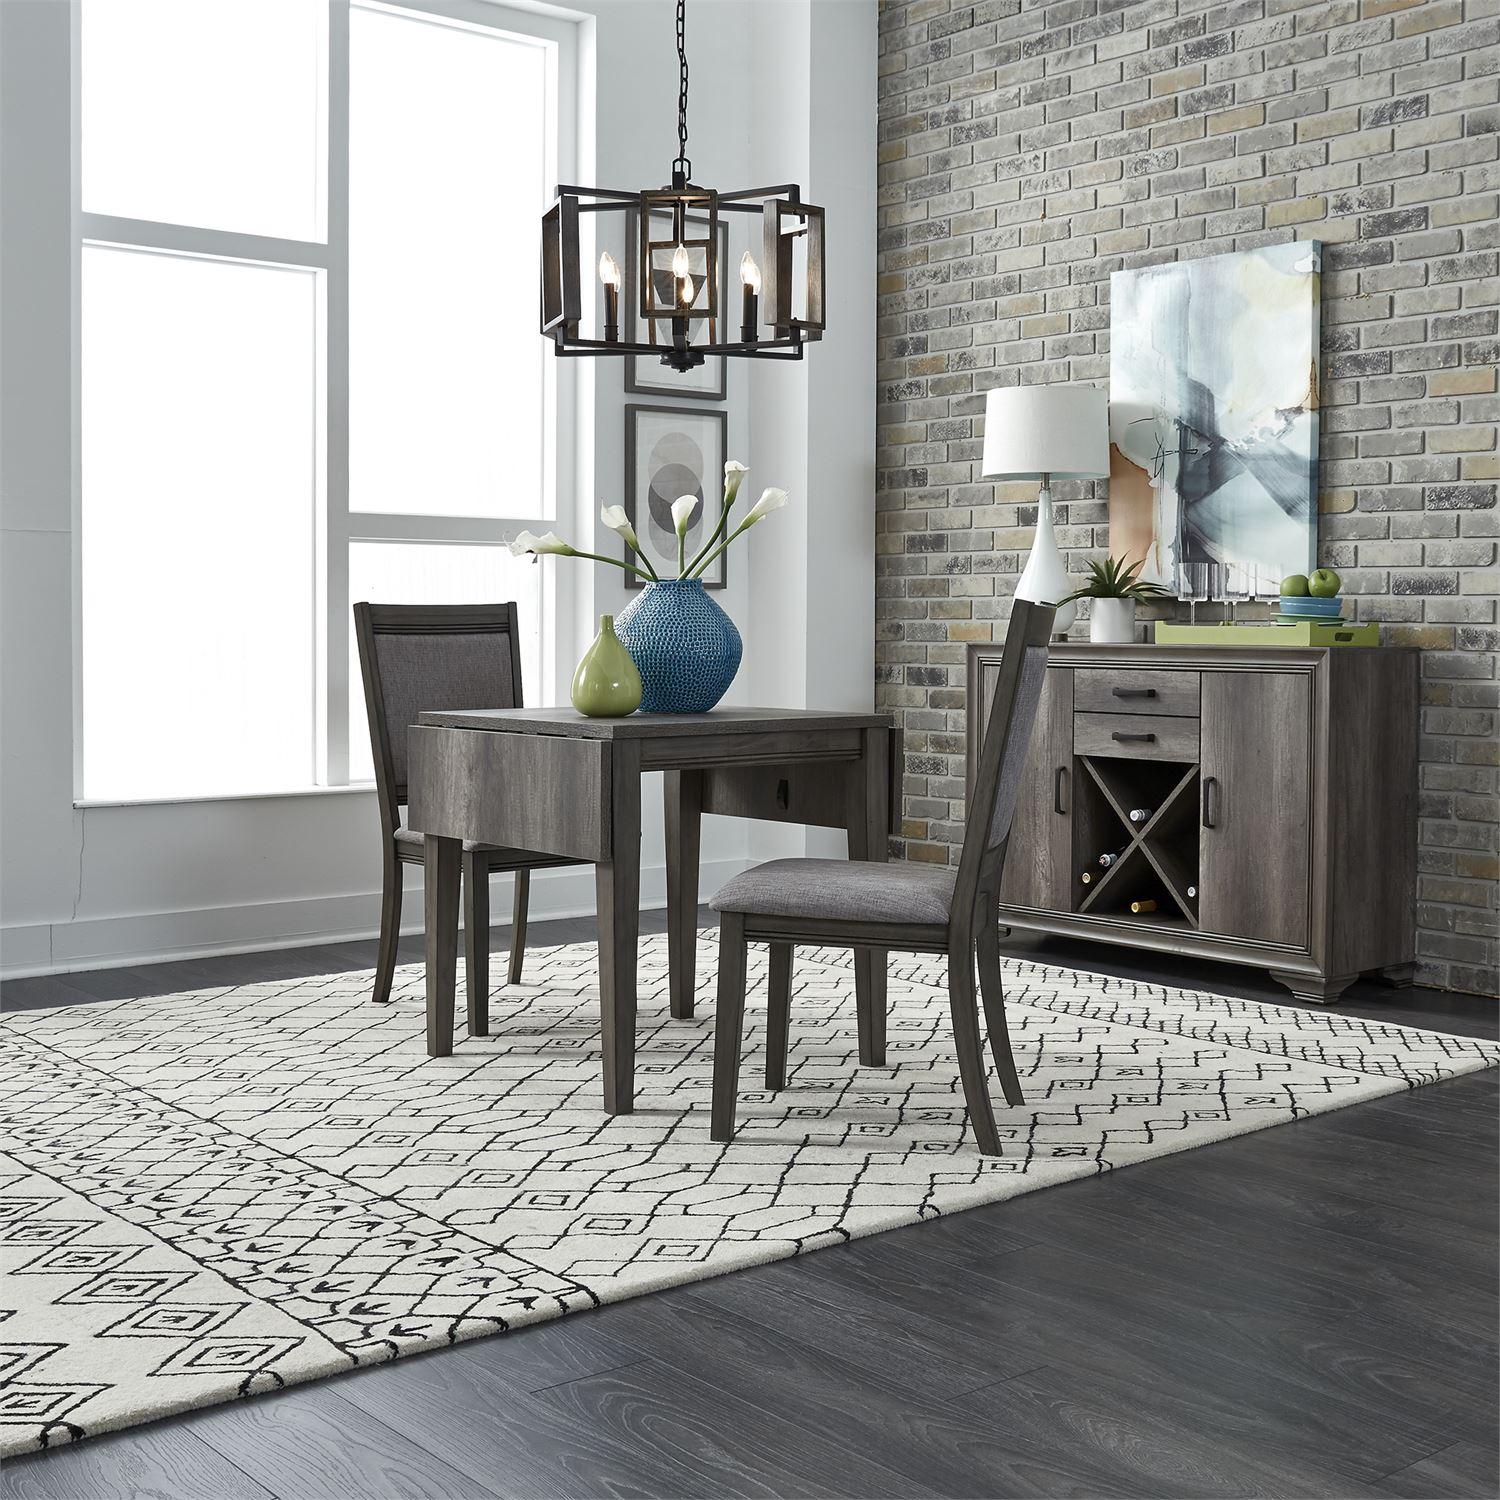 Contemporary Dining Room Set Tanners Creek  (686-CD) Dining Room Set 686-CD-O3DLS in Gray Fabric